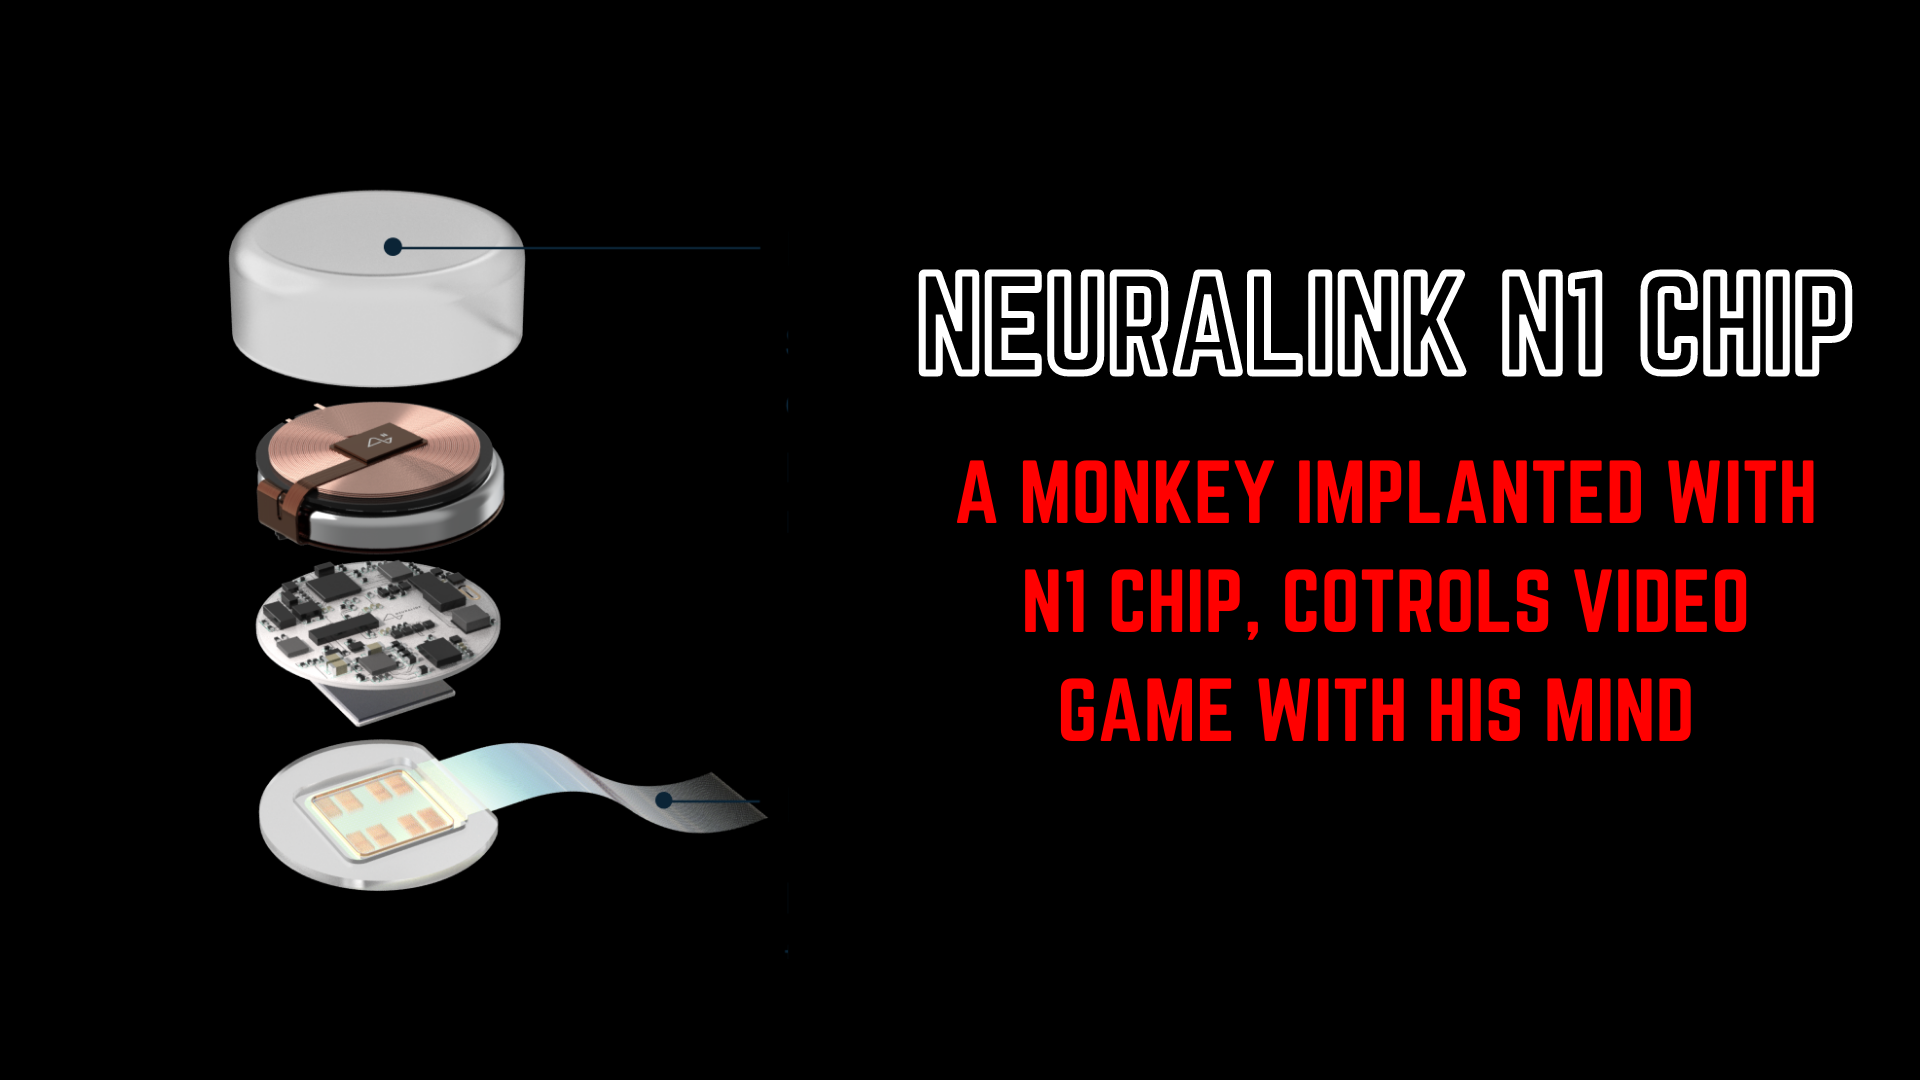 Neuralink chip implanted in a monkey brain who controls a video game without controller with his mind